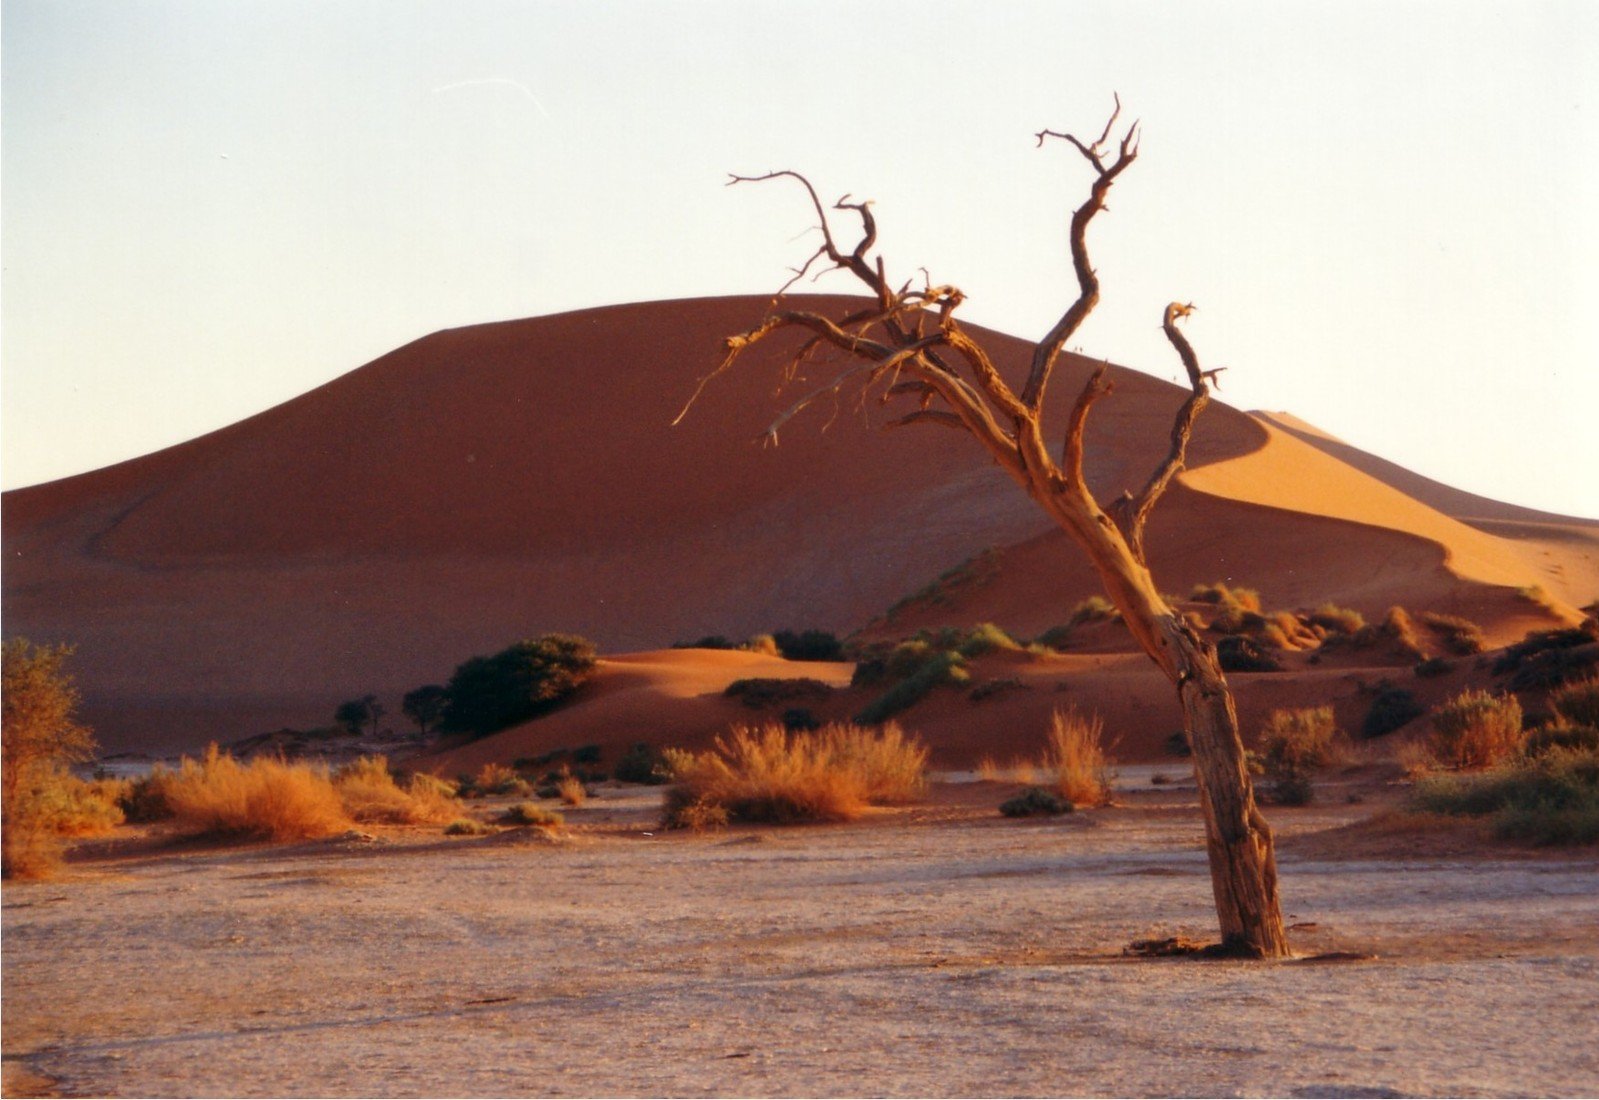 a barren tree in a desert area with a mountain in the background